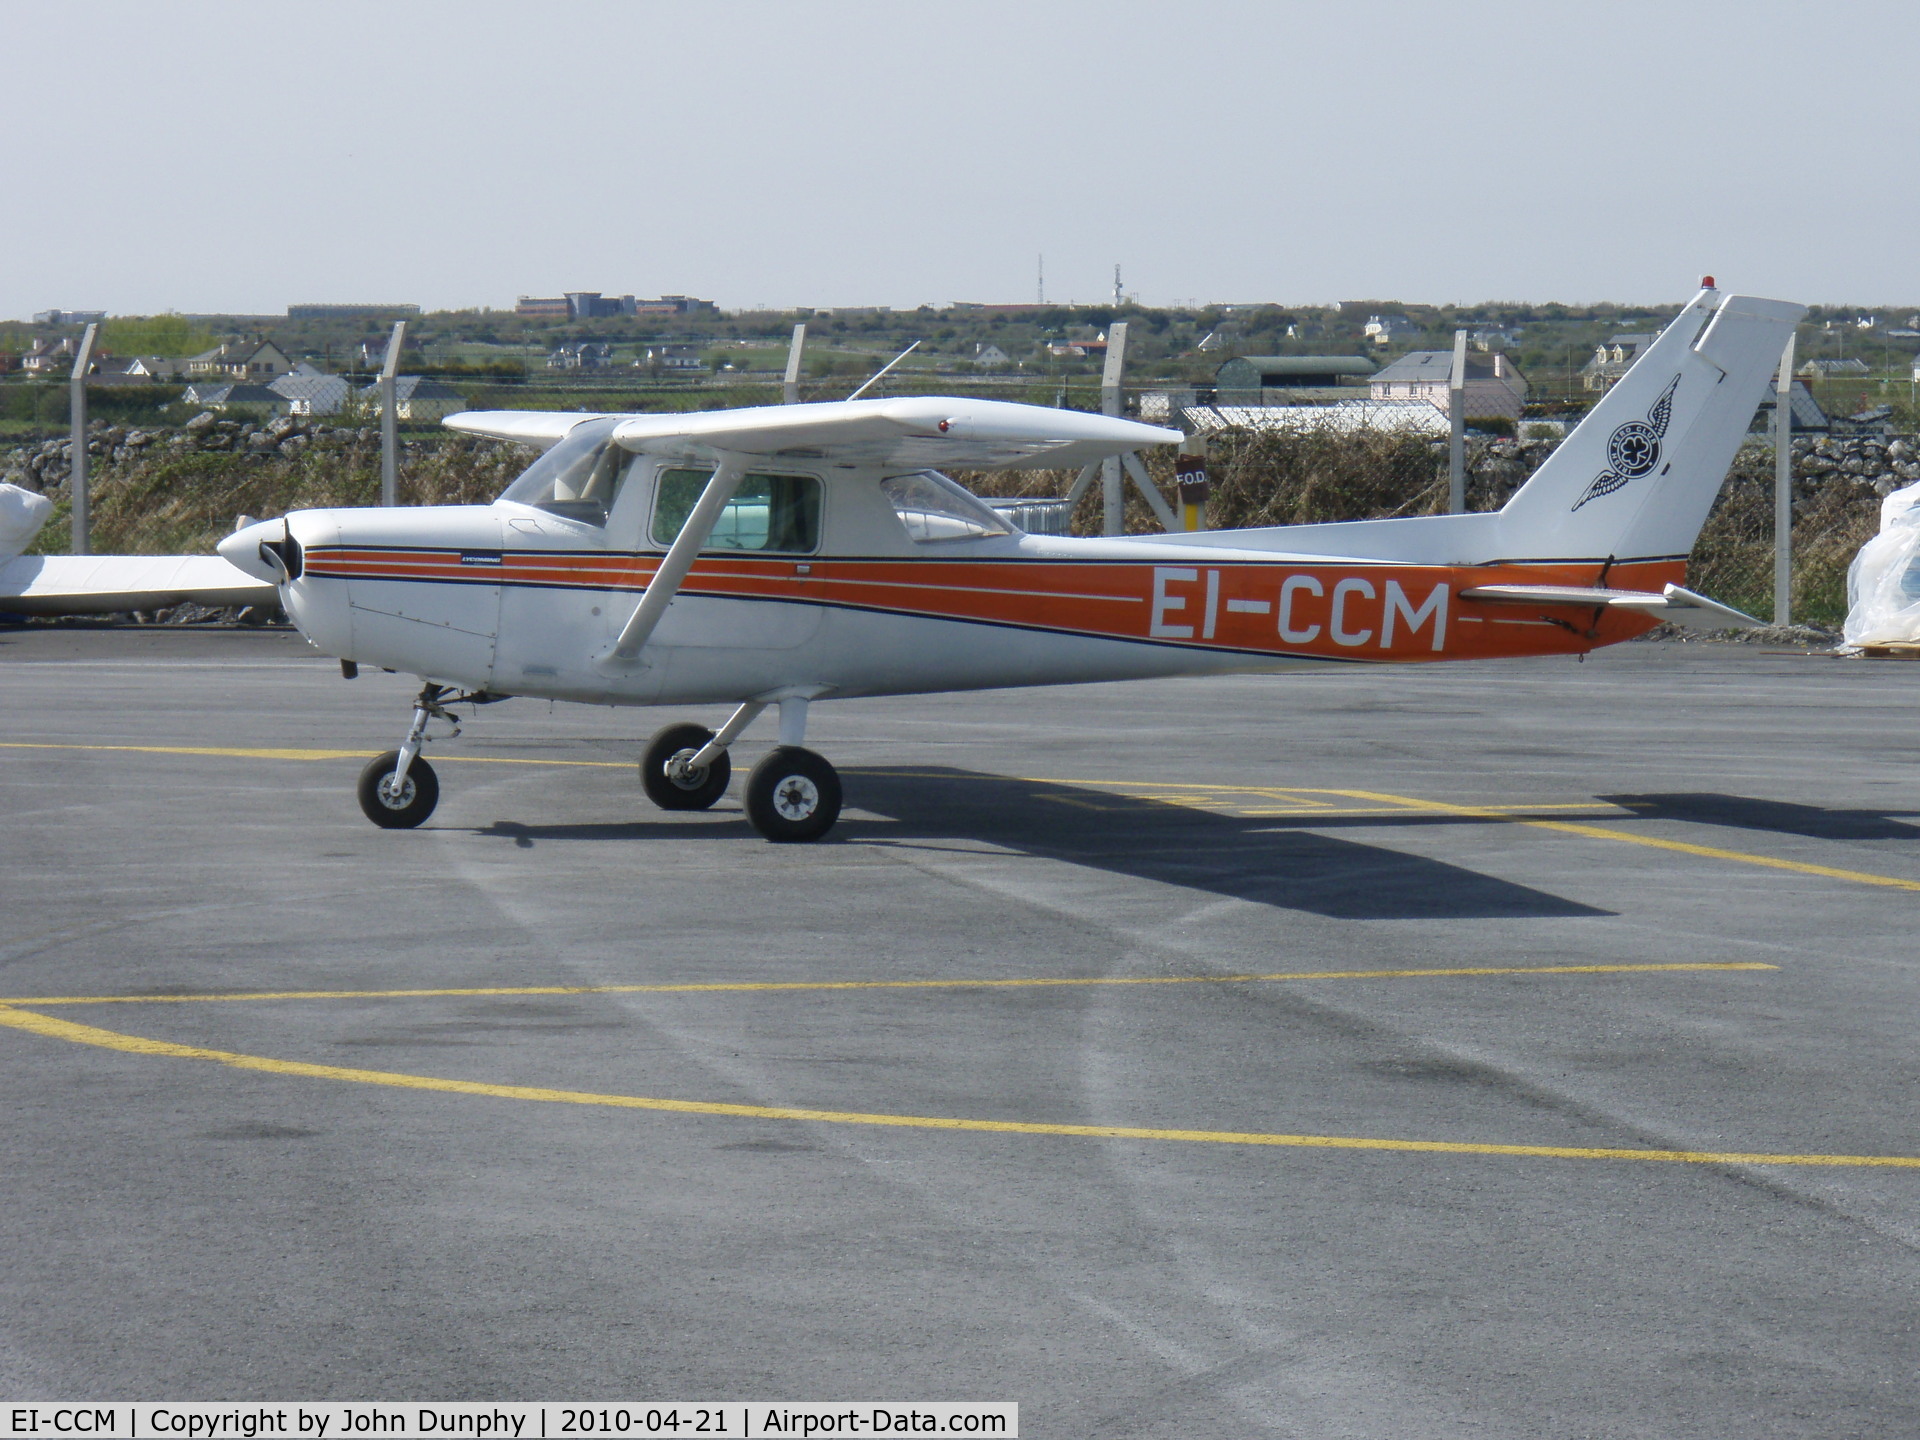 EI-CCM, 1979 Cessna 152 C/N 152-82320, Parked on the apron at Galway Airport 21/4/2010 at 12.05hrs